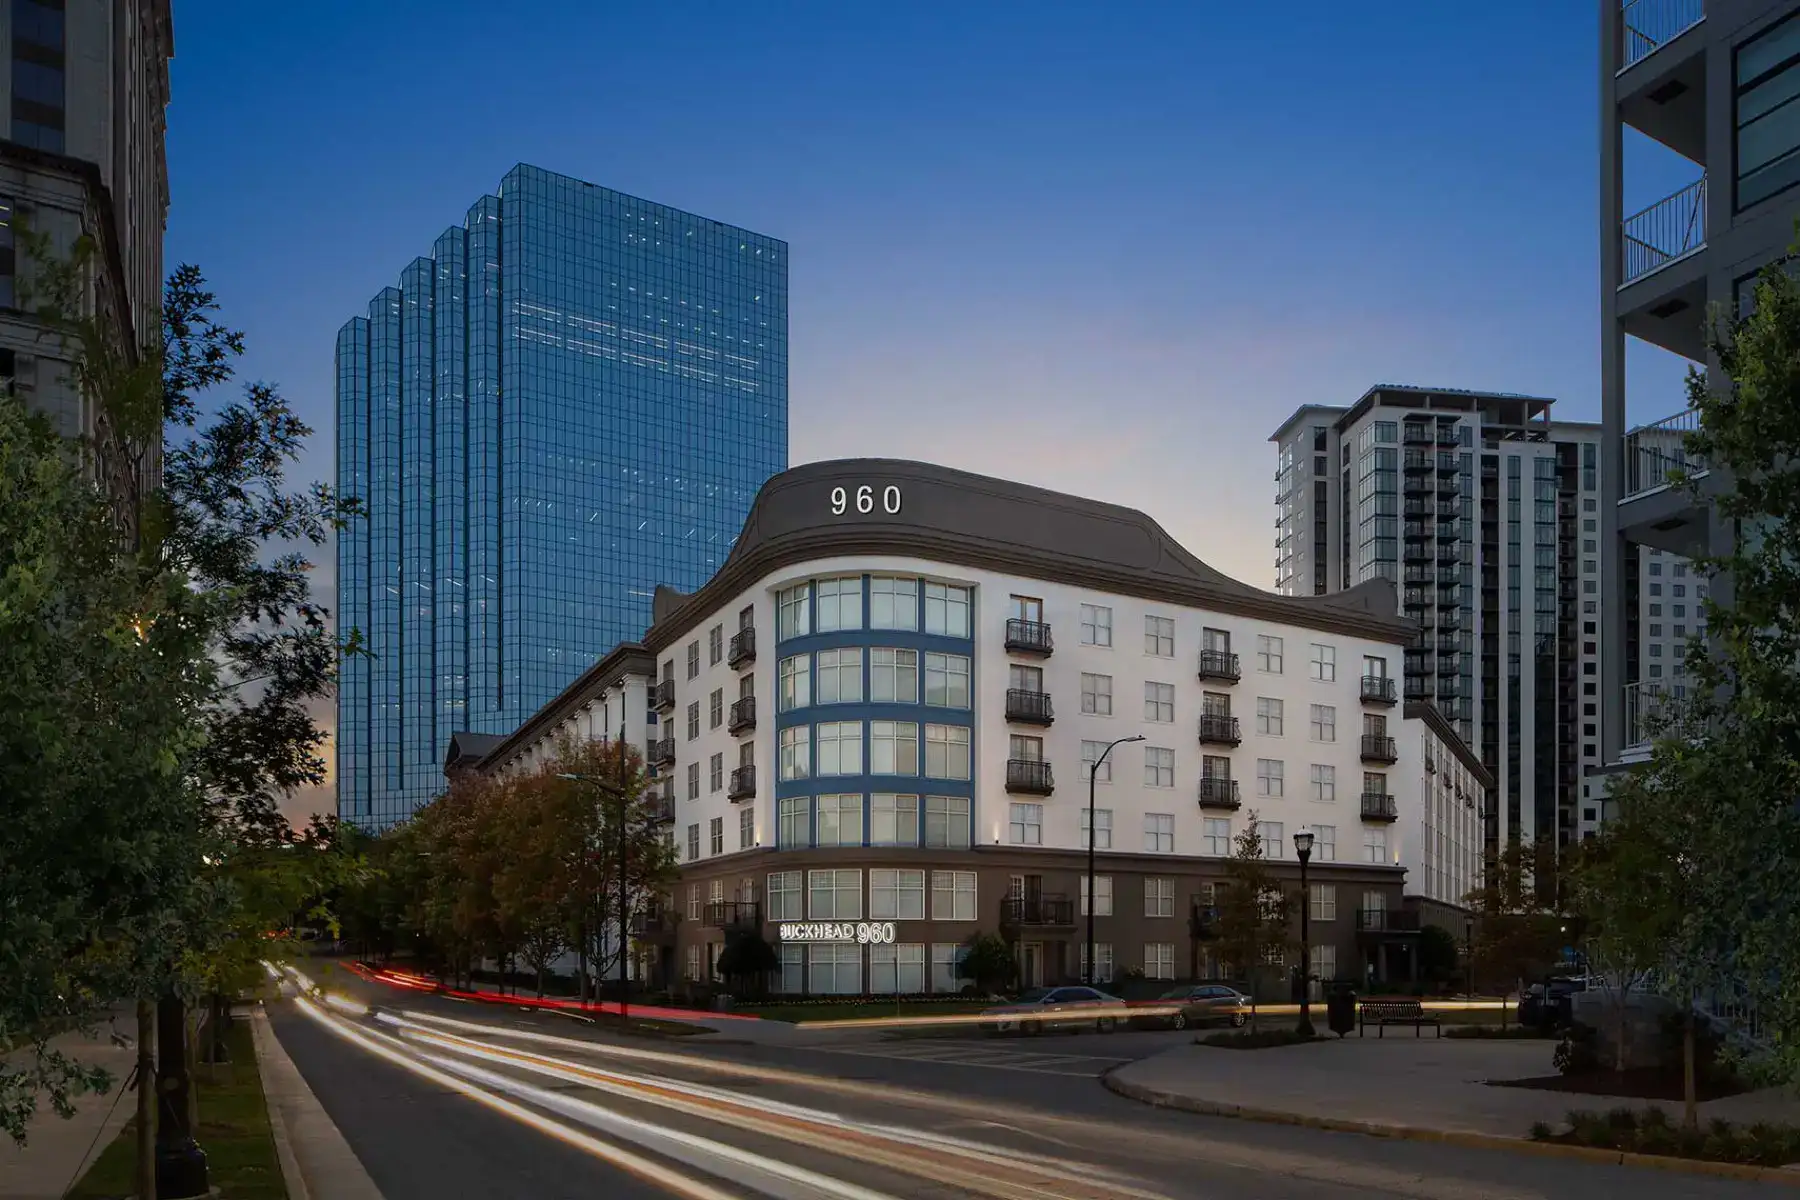 Exterior view of Buckhead 960 Building showcasing modern architectural design and glass facade